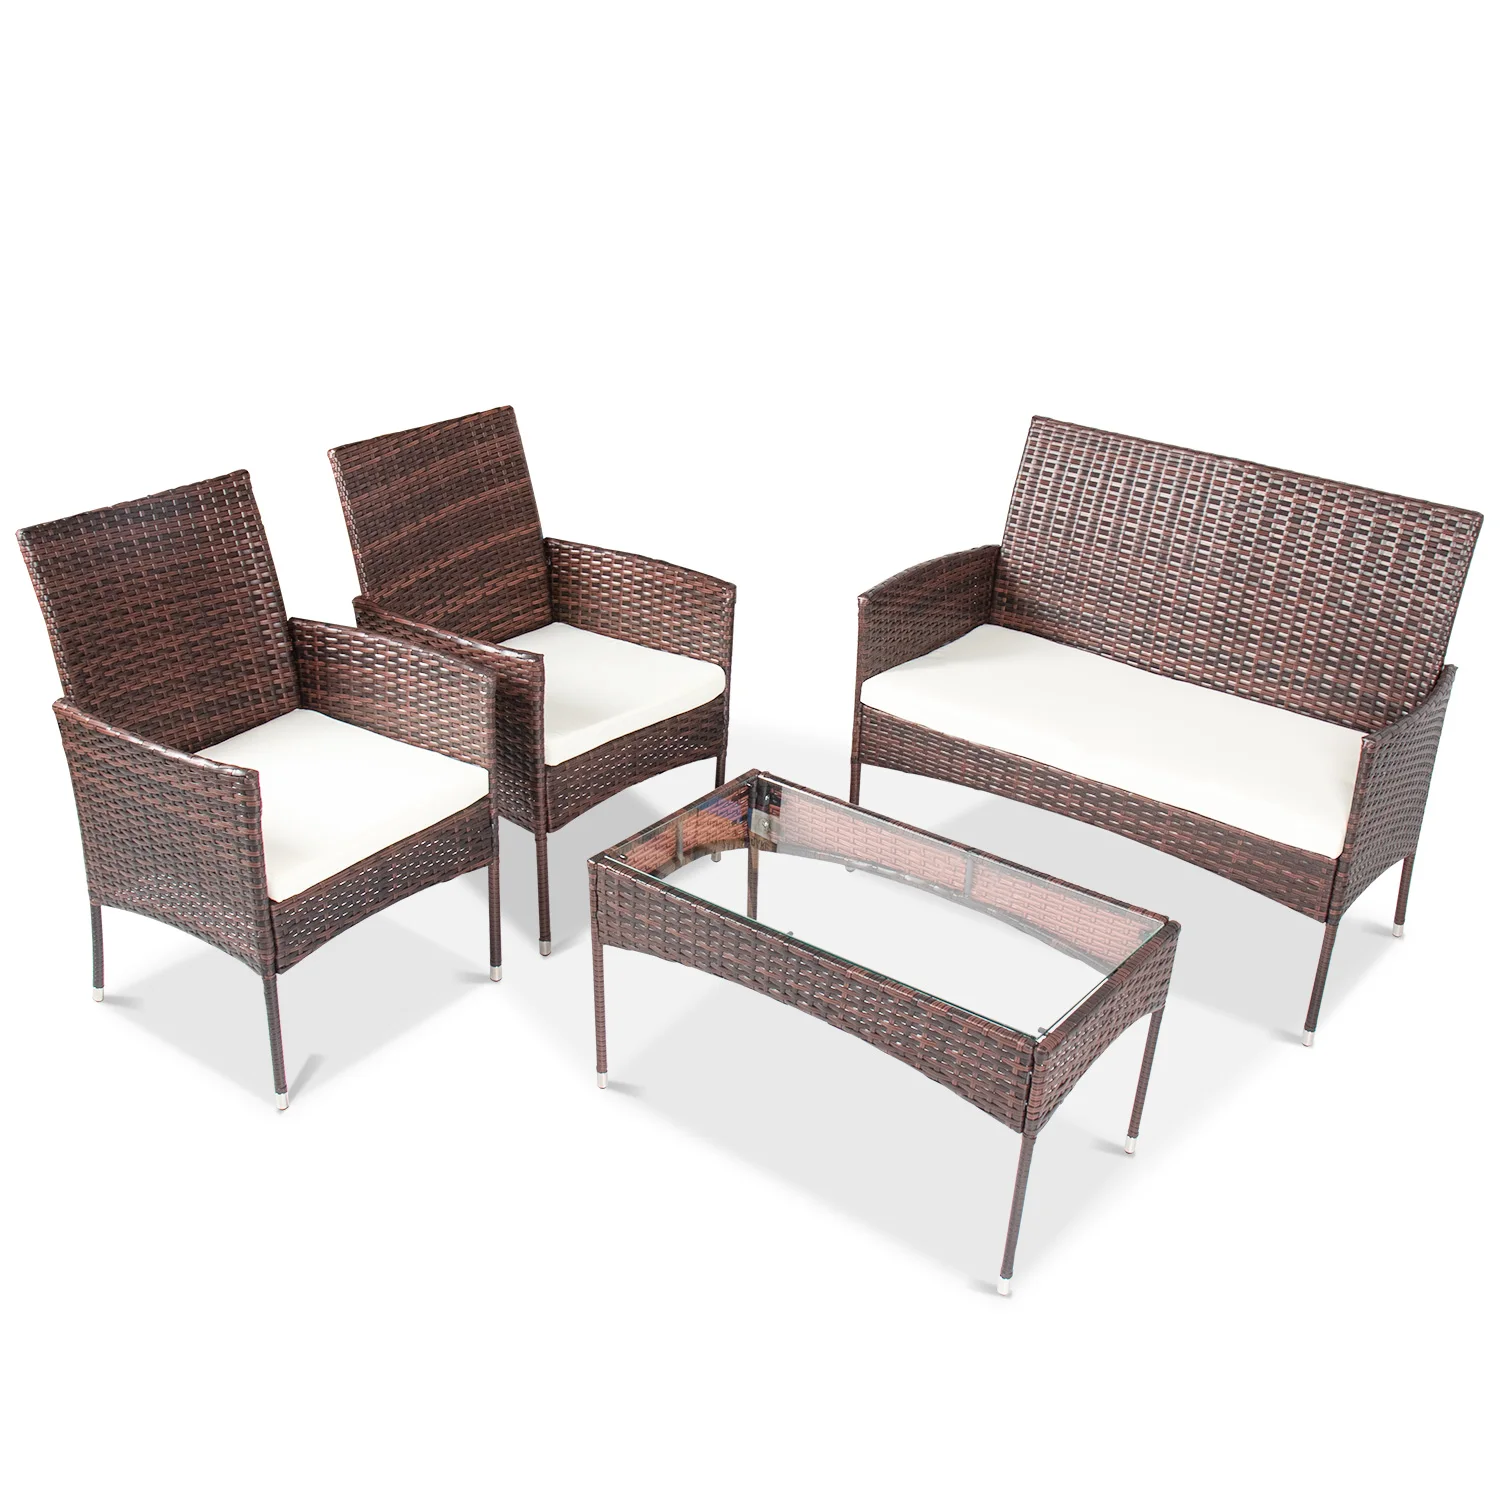 

USA Free Shipping Sofa Sectionals Rattan Patio Furniture Outdoor Patio Furniture, Brown